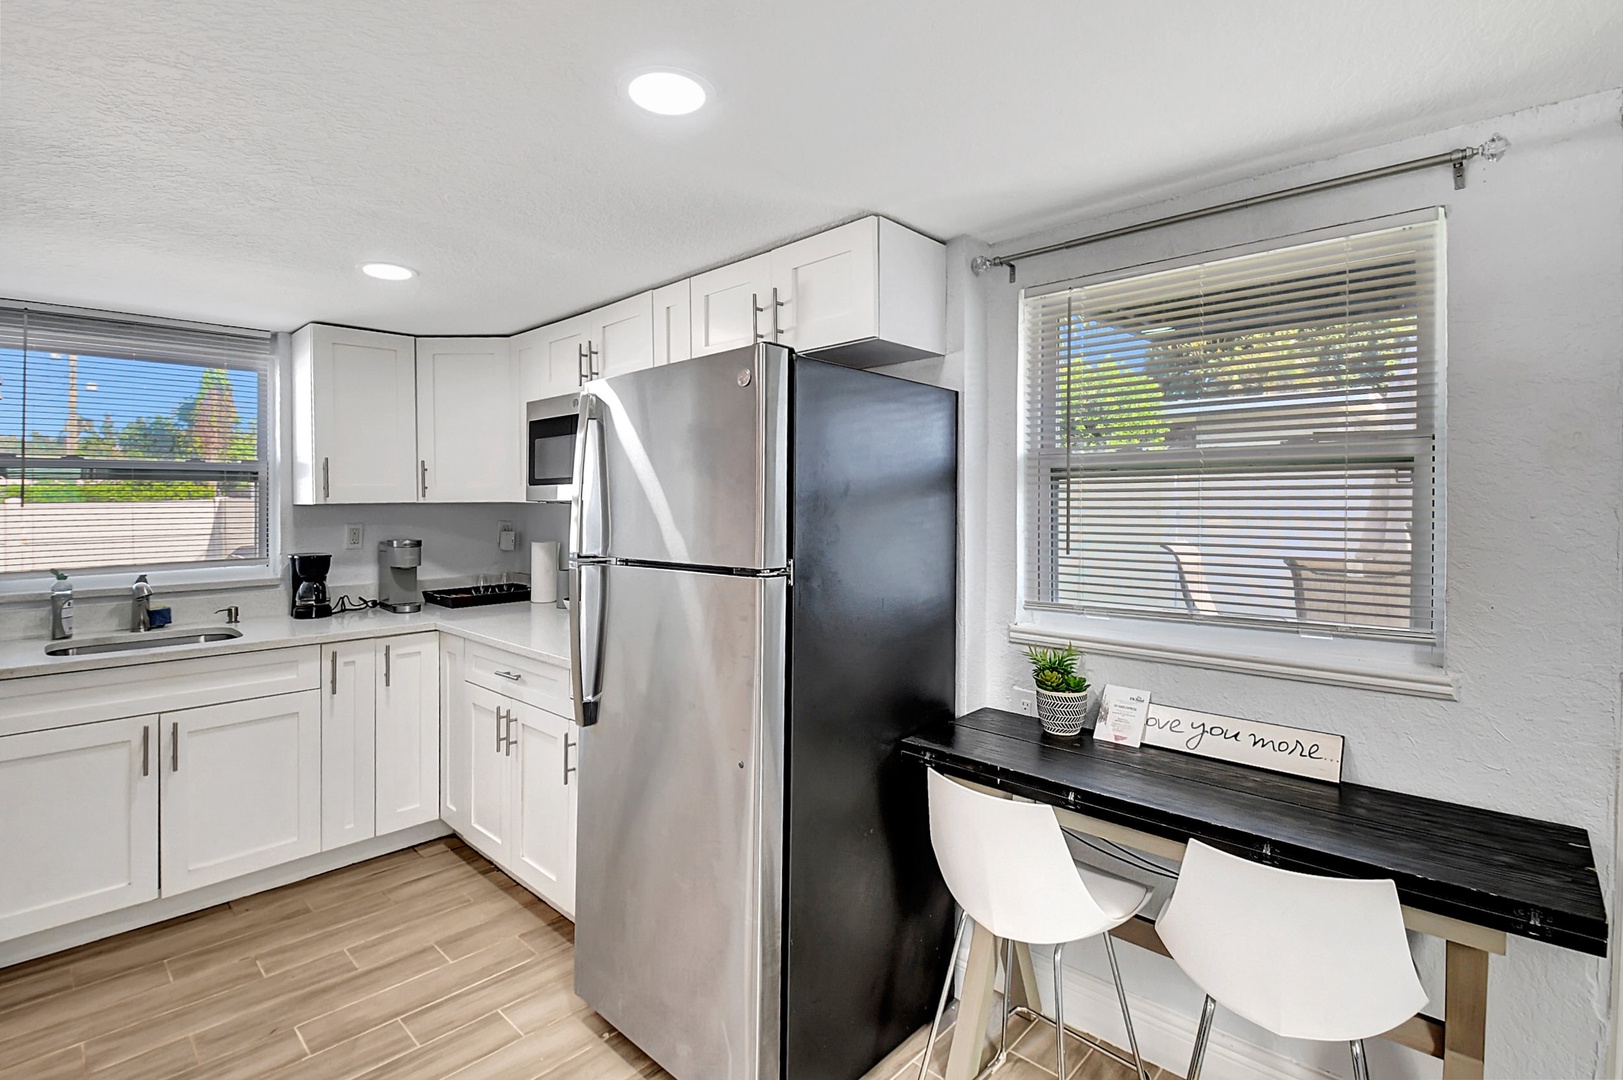 The streamlined kitchen is well-equipped for your visit